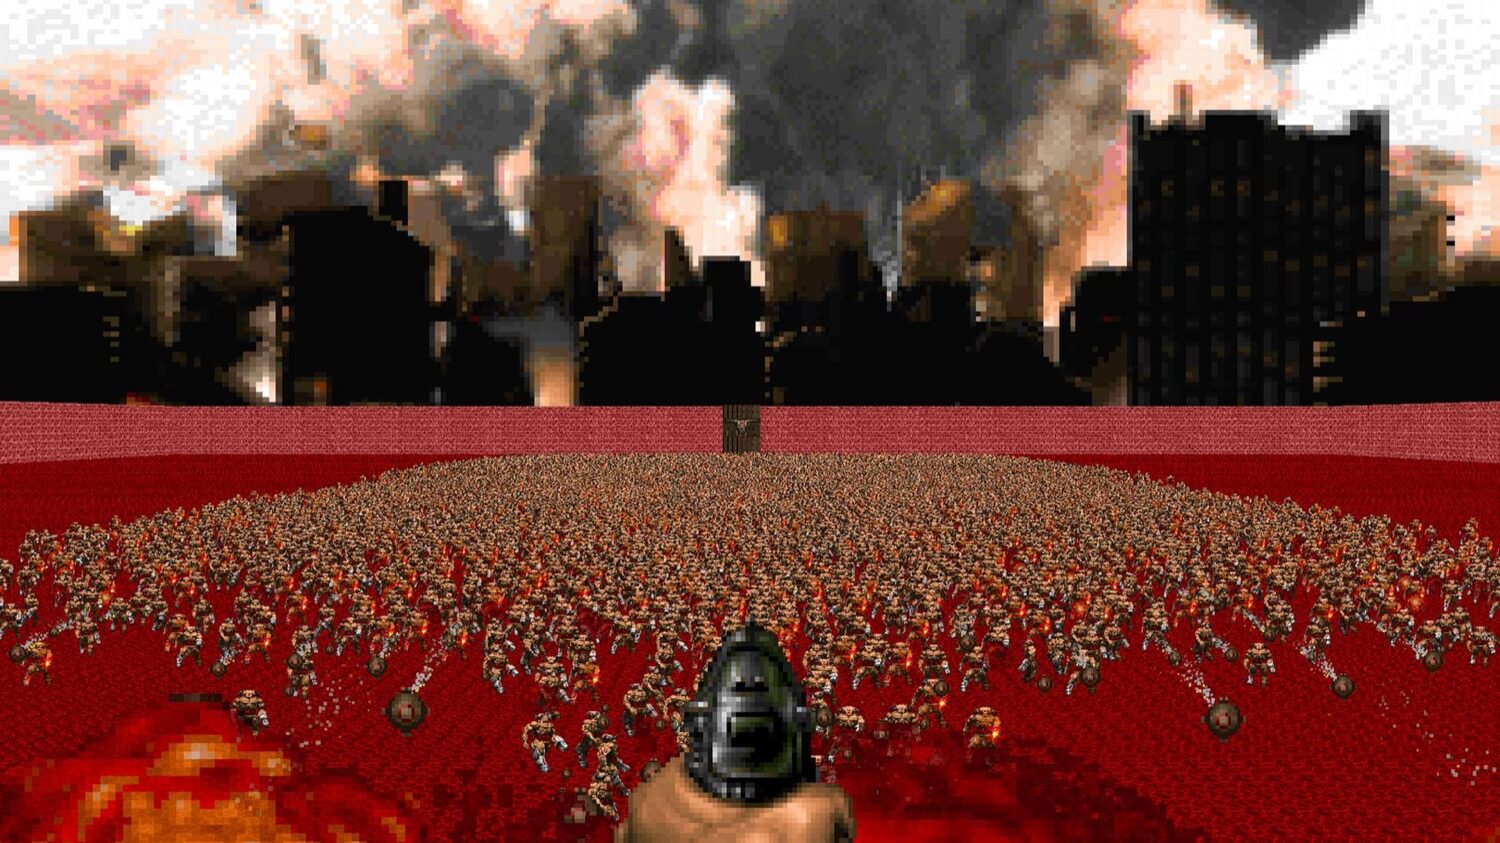 Artificial intelligence has created levels for Doom not worse people